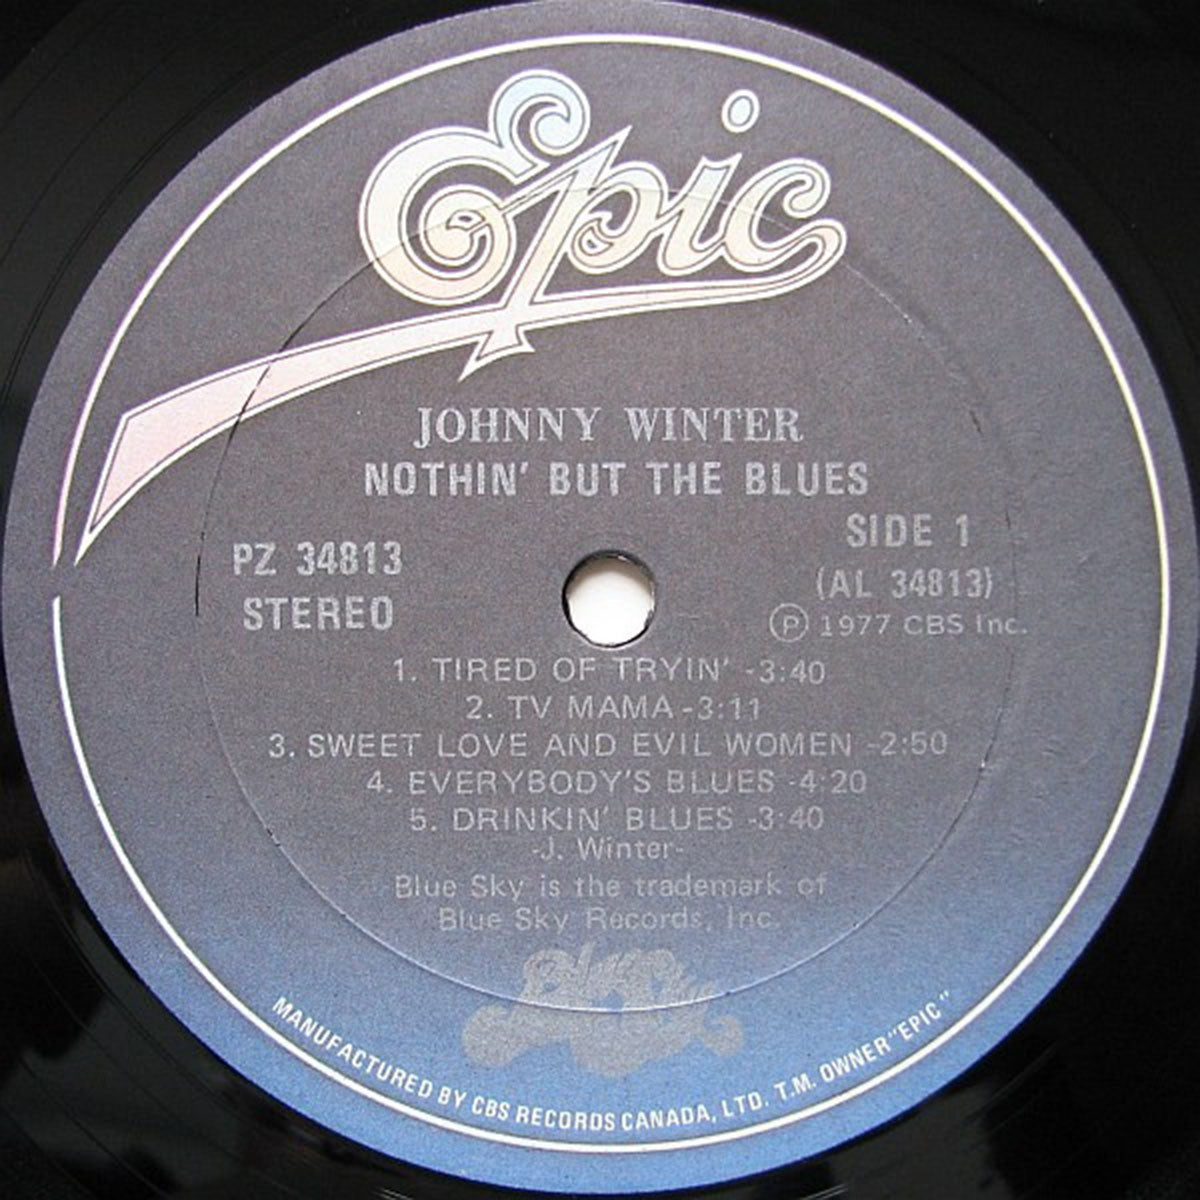 Johnny Winter – Nothin' But The Blues